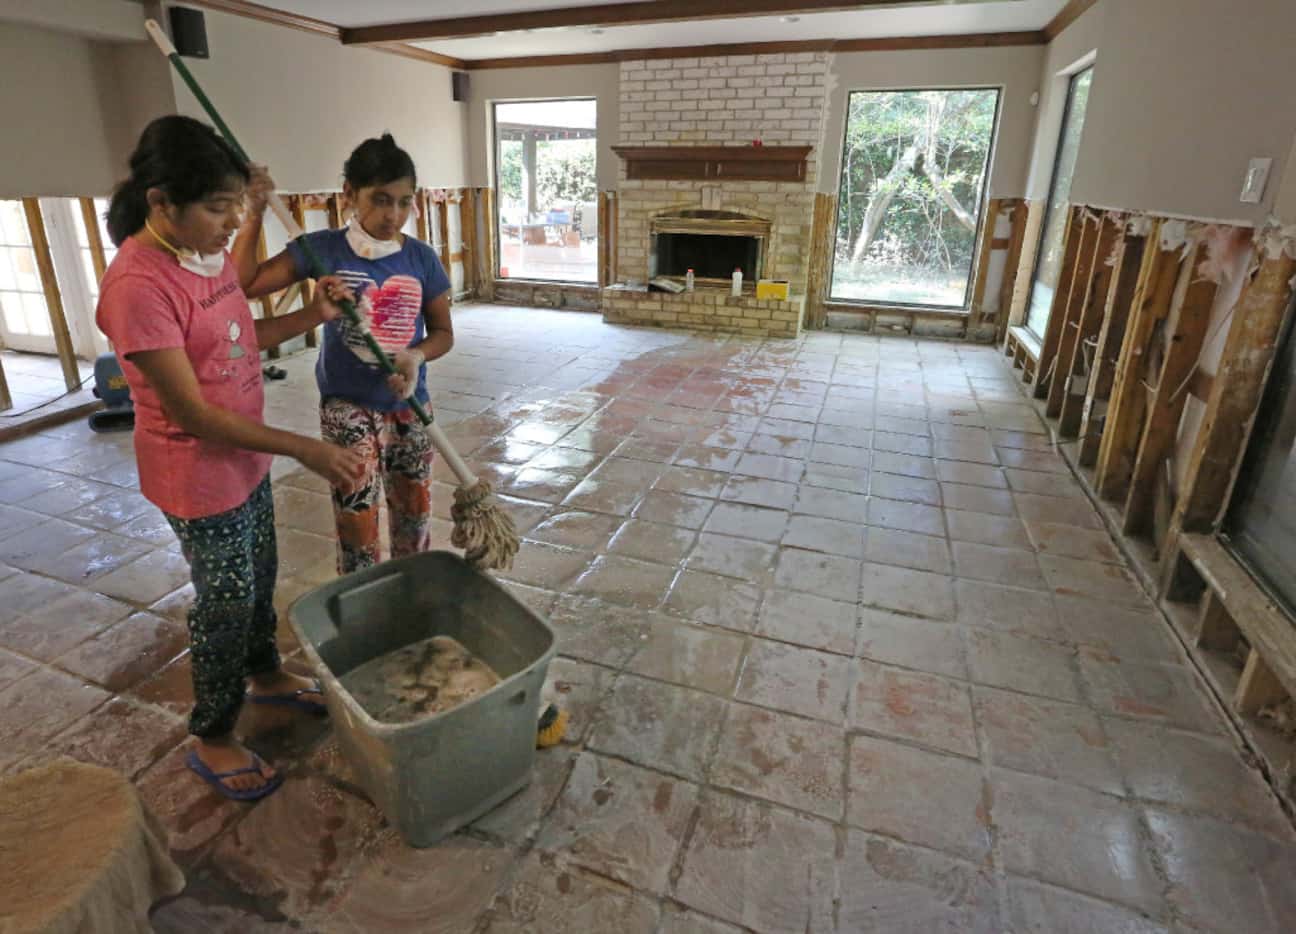 Twin sisters Saloni and Sugani Singh, 10, share mopping duties as they work to clean up...